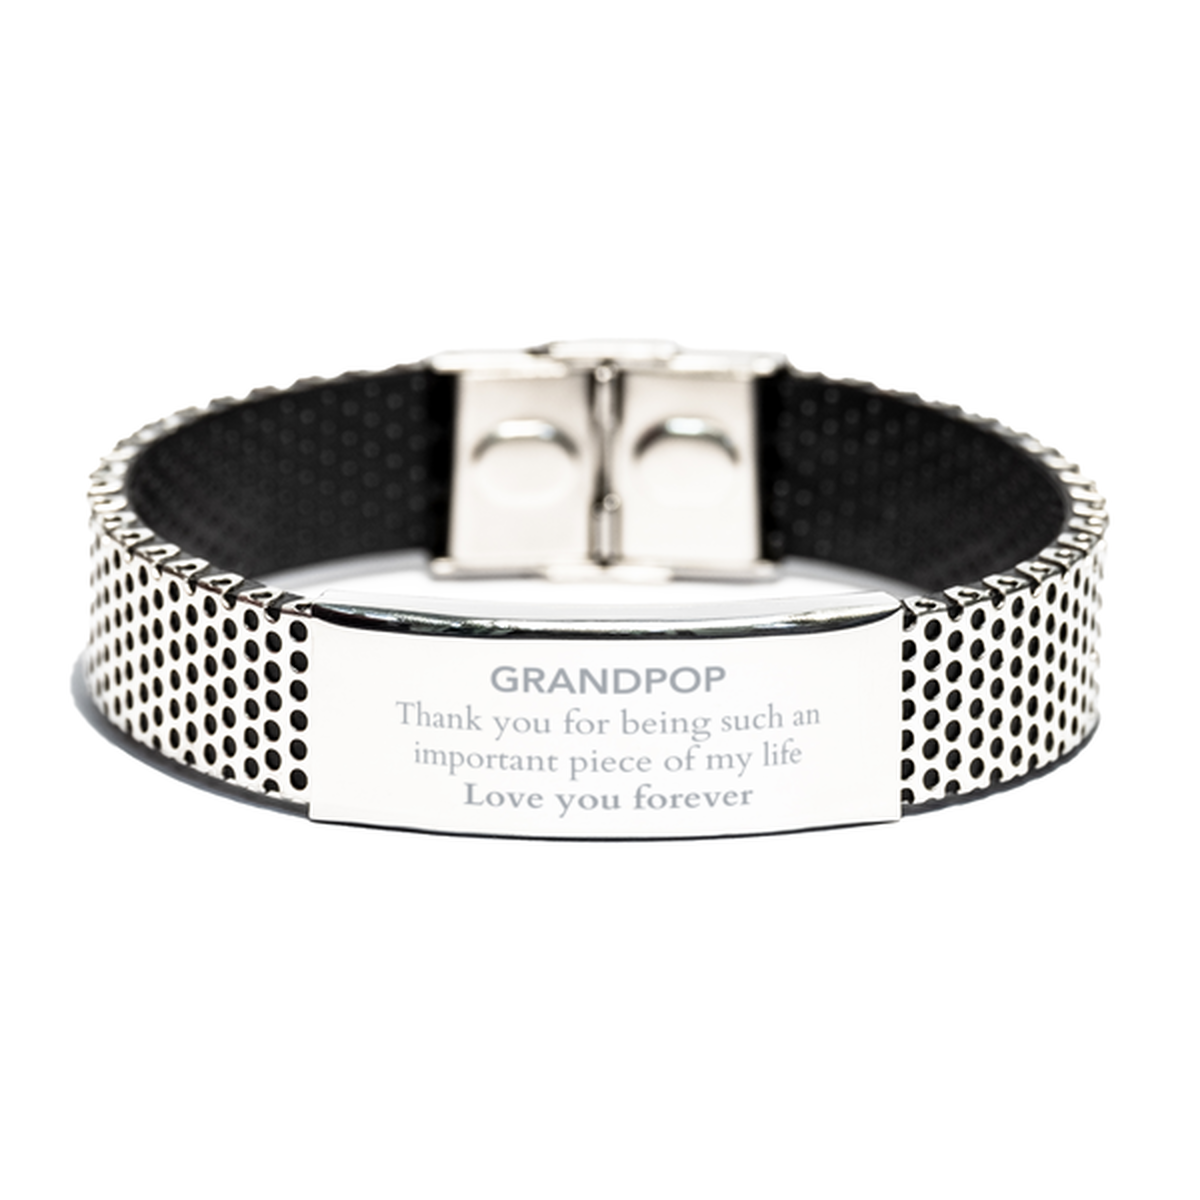 Appropriate Grandpop Stainless Steel Bracelet Epic Birthday Gifts for Grandpop Thank you for being such an important piece of my life Grandpop Christmas Mothers Fathers Day